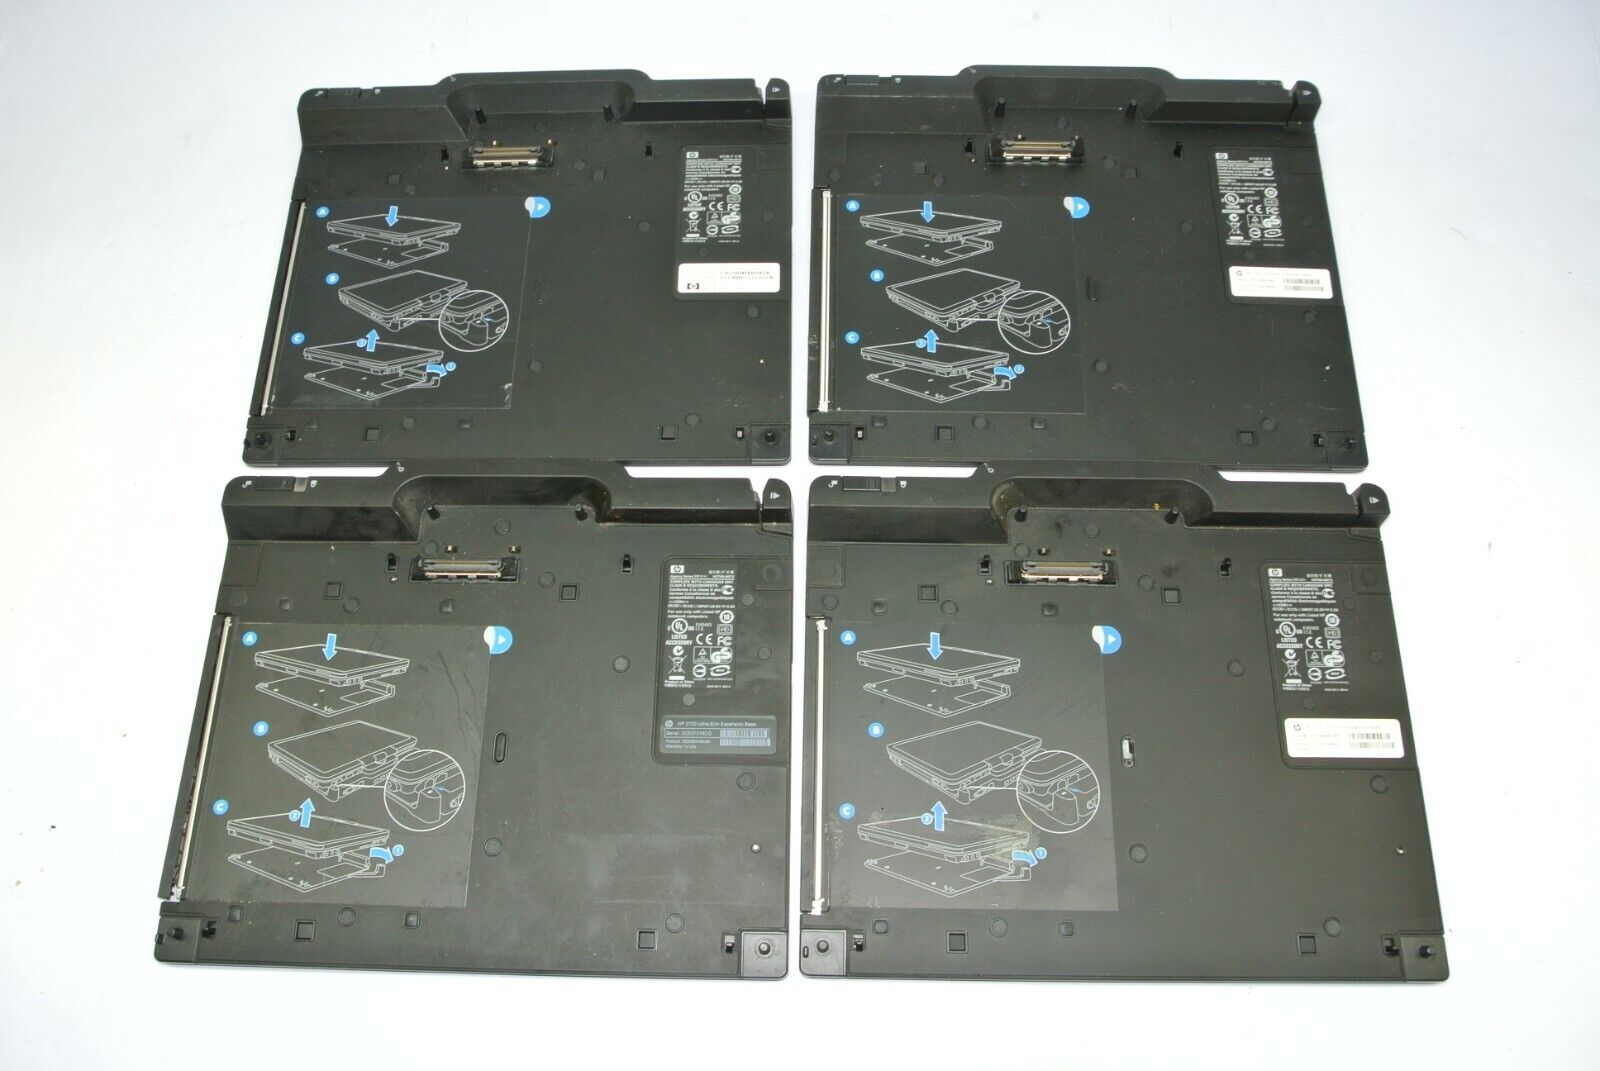 Qty (10) HP 2700 Ultra-Slim Expansion Base GD229AA#ABA - no AC adapters